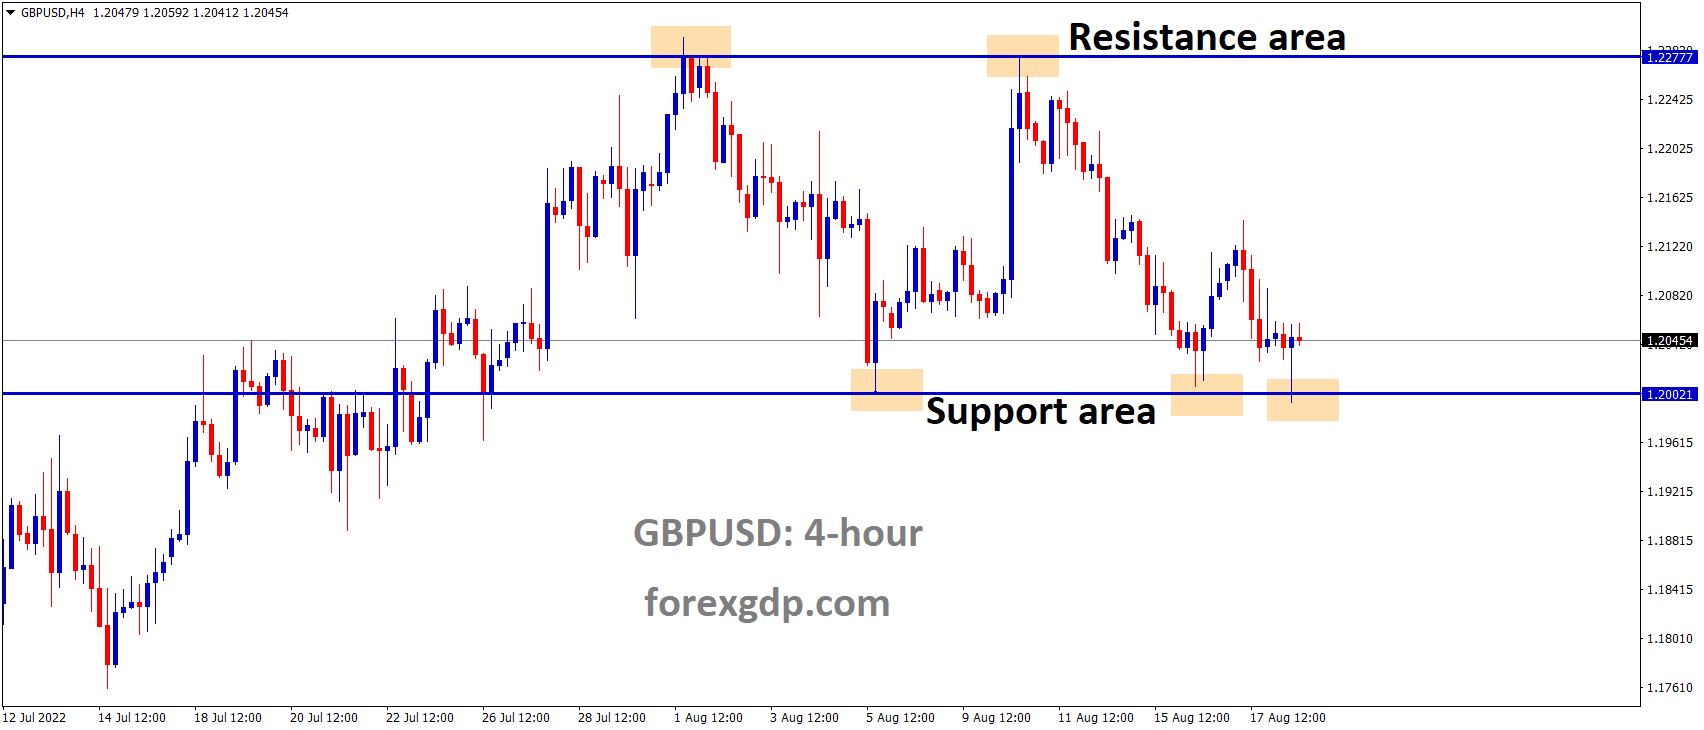 GBPUSD is moving in the Box Pattern and the Market has rebounded from the horizontal support area of the pattern